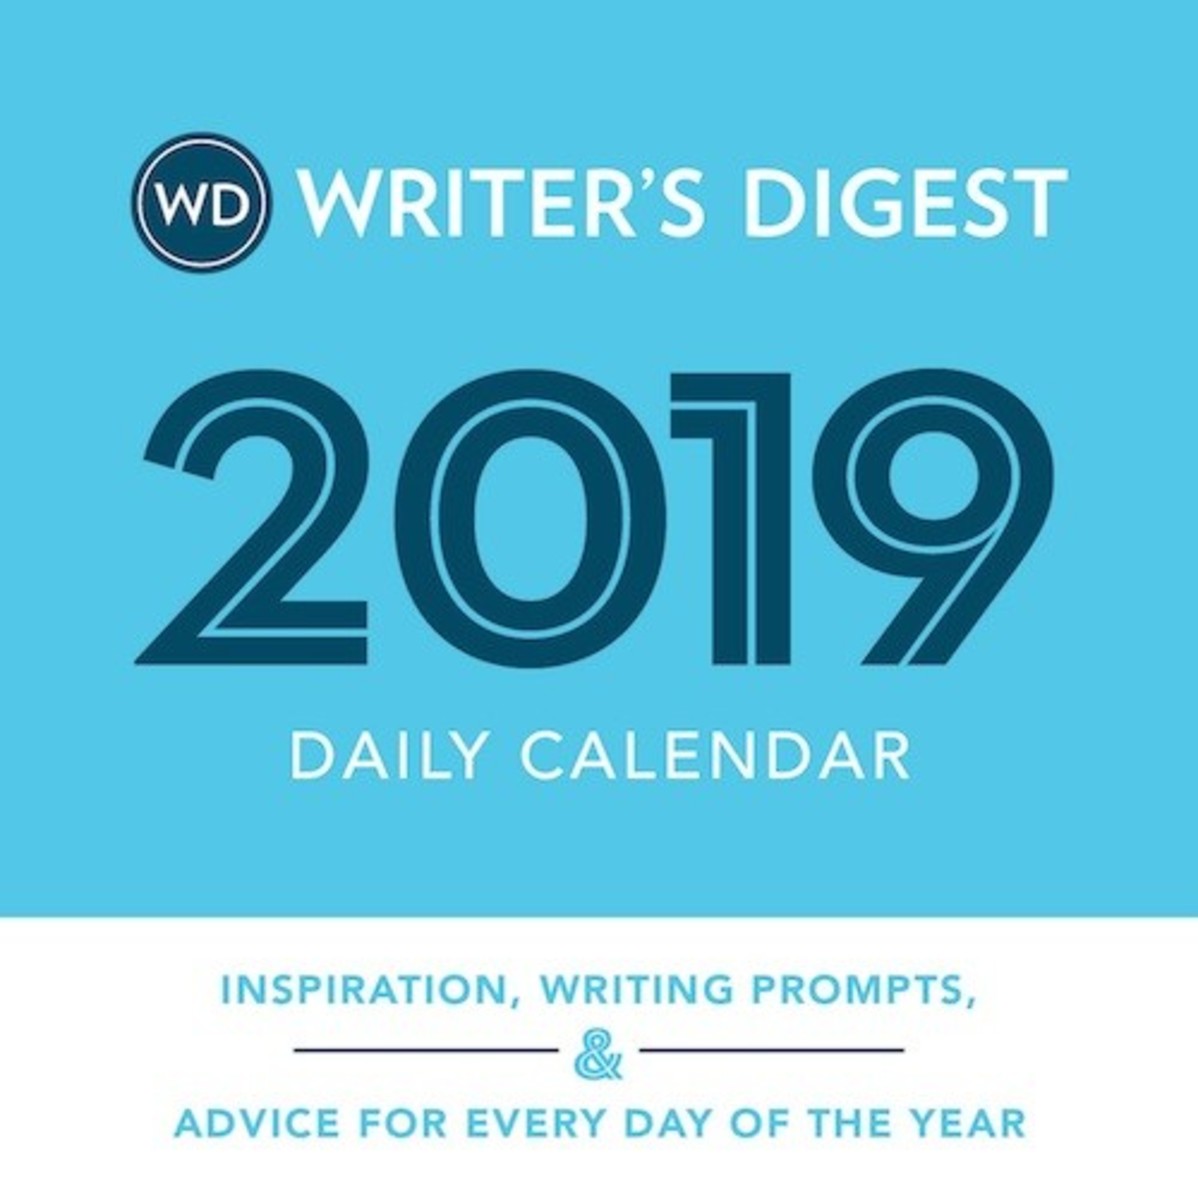  Writer's Digest 2019 Daily Calendar: Inspiration, Writing Prompts, and Advice for Every Day of the Year